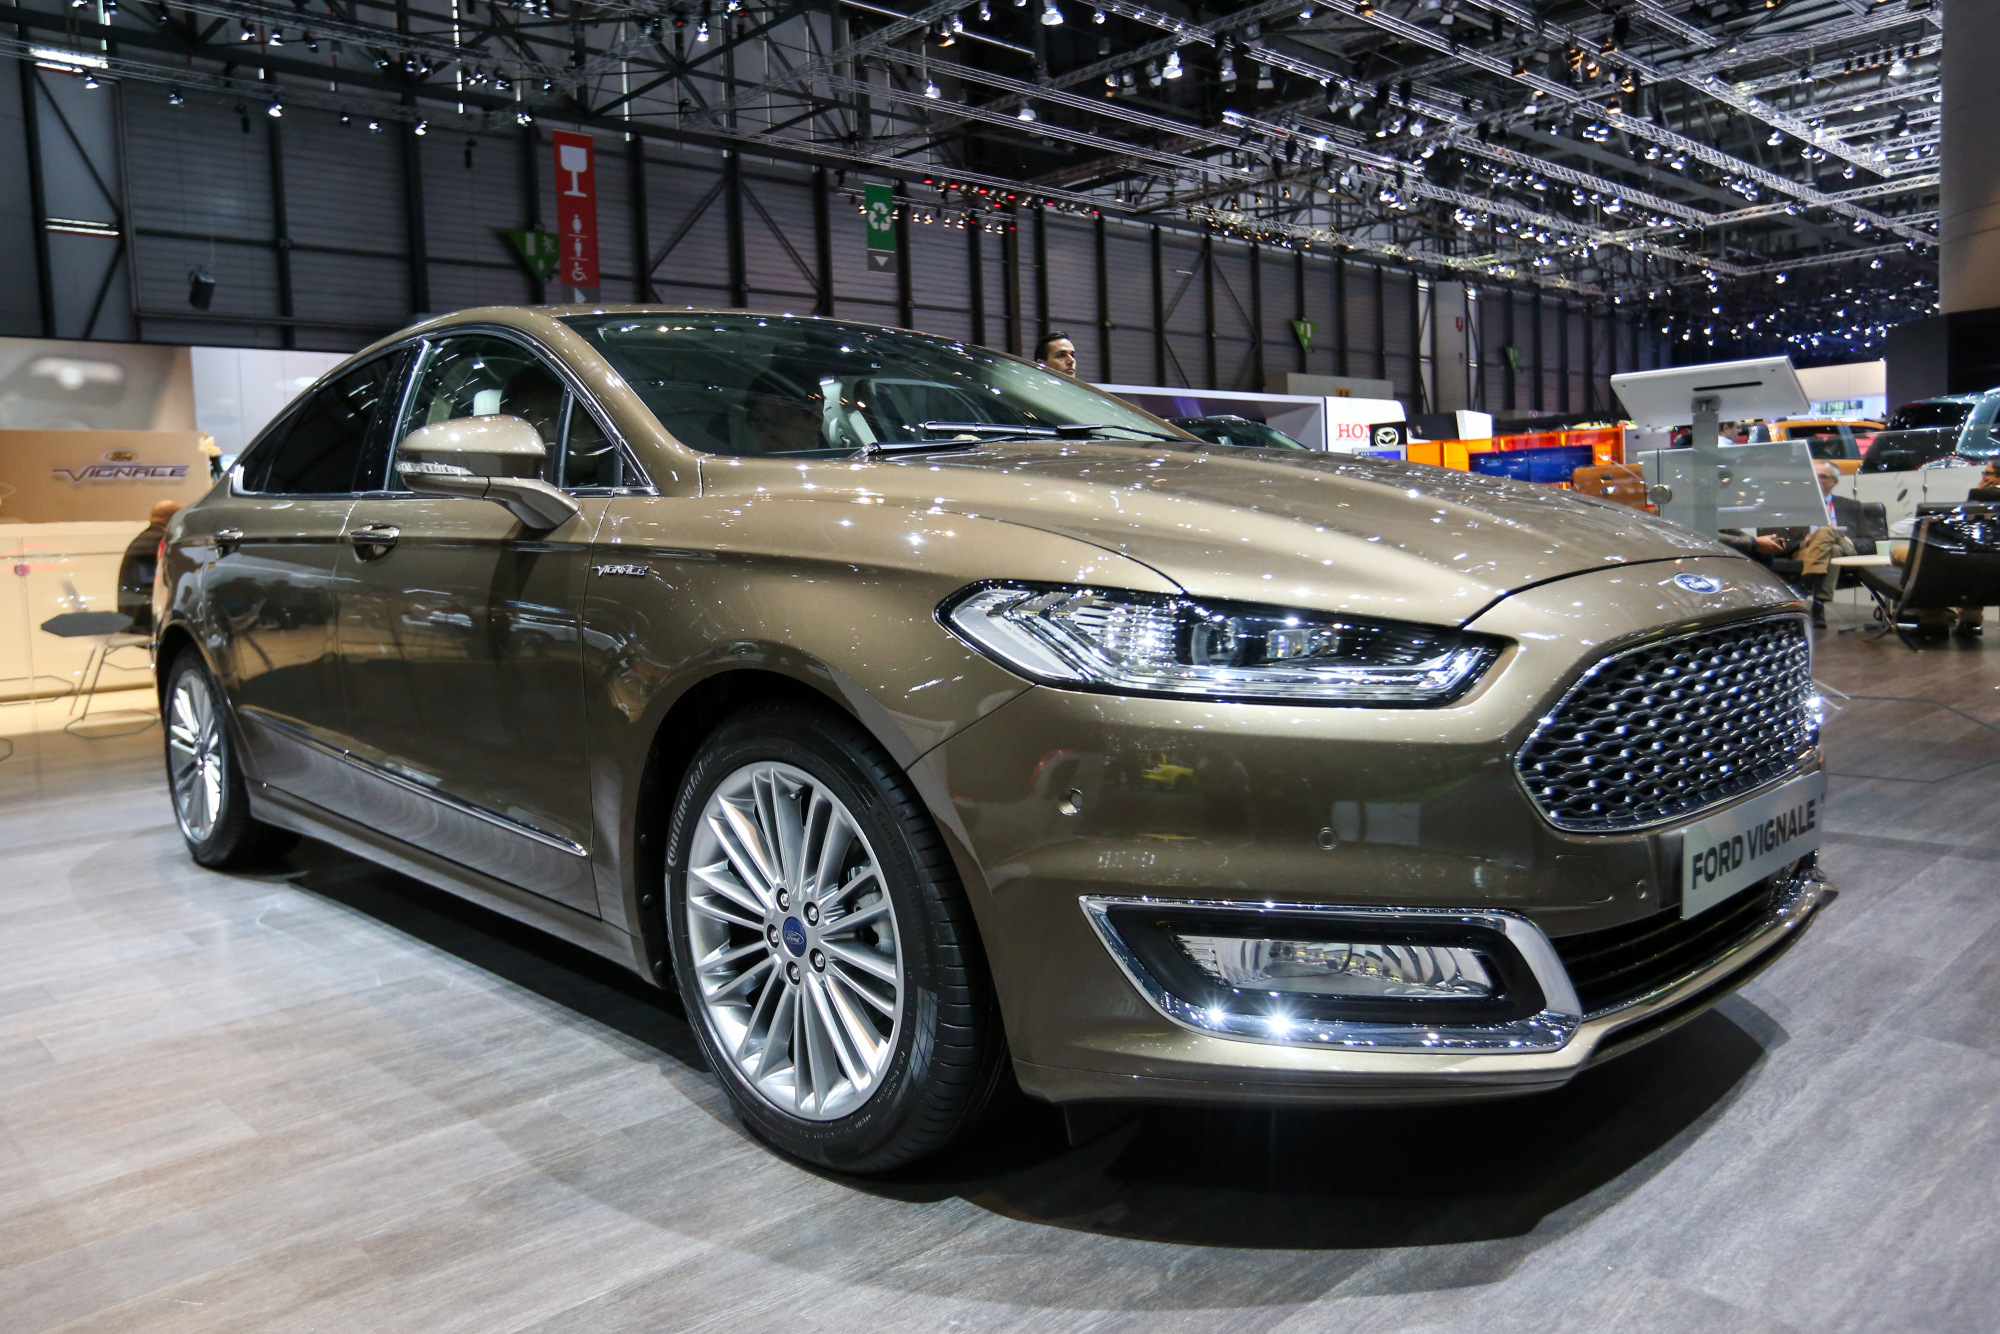 Ford to end production of Mondeo model, Ford